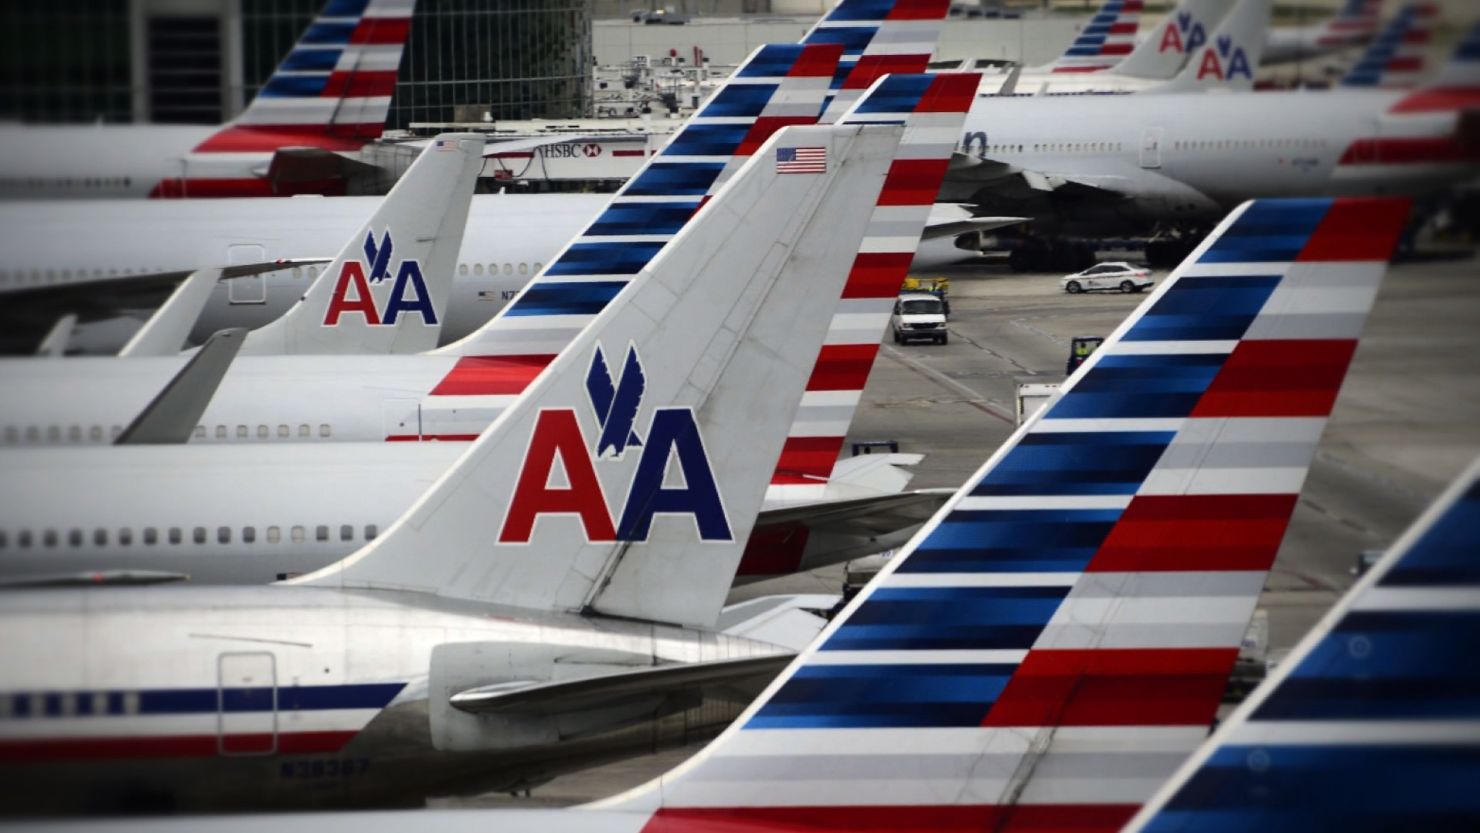 A woman is suing American Airlines over harassing text messages she says she received from an airline employee.